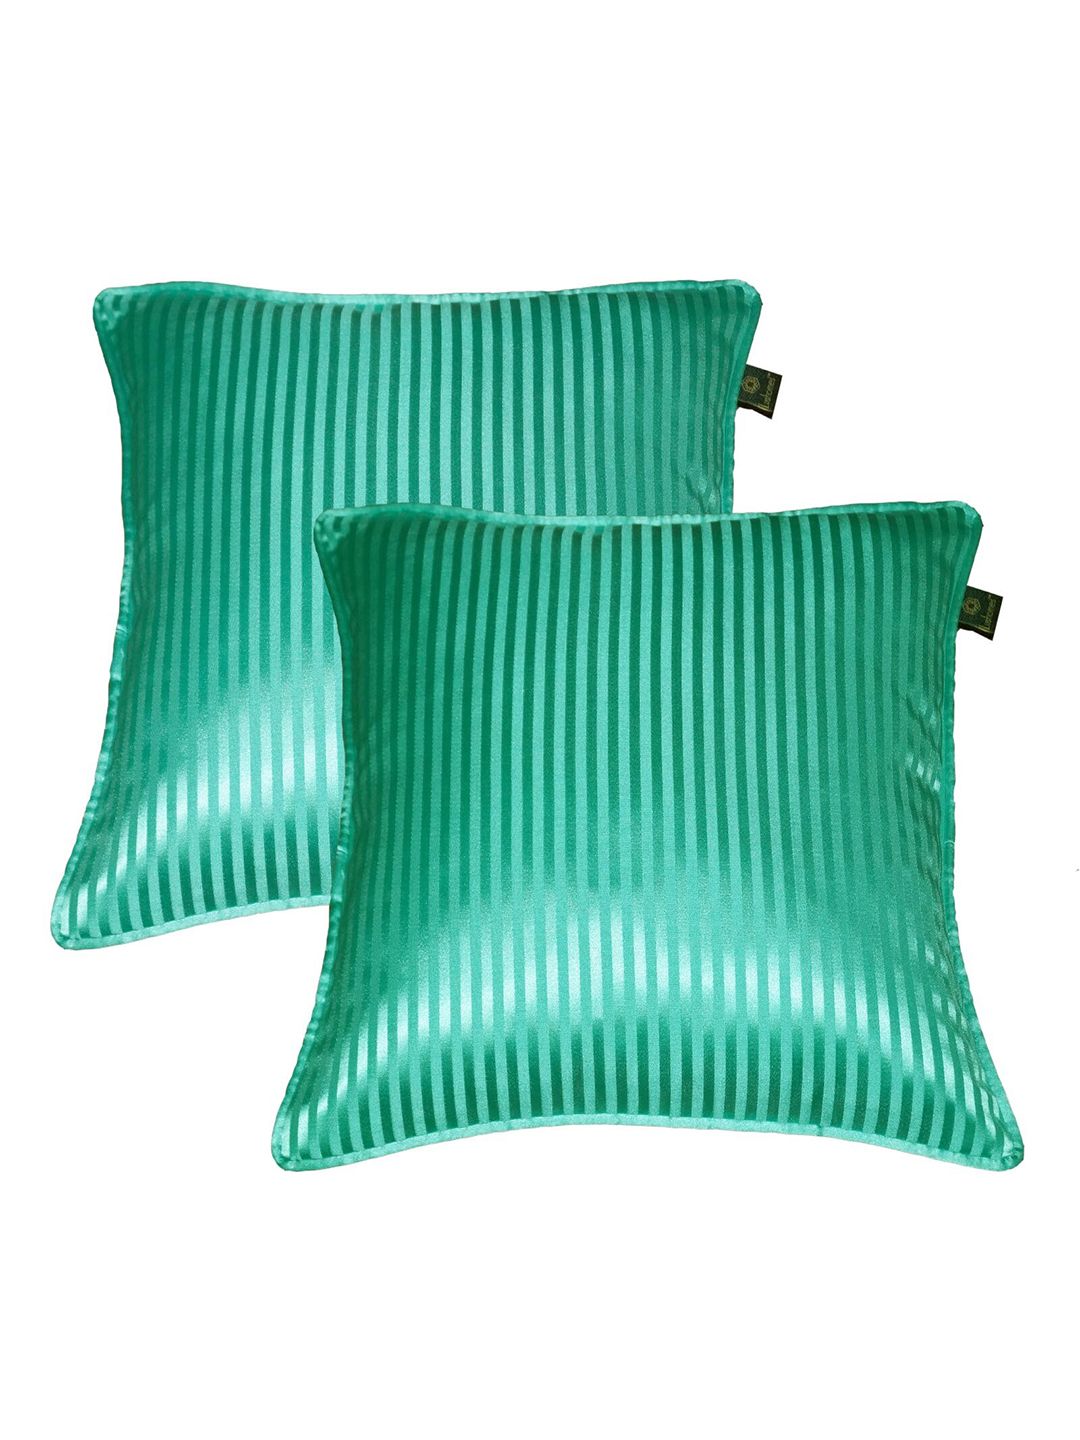 Lushomes Sea Green Set of 2 Striped Square Cushion Covers Price in India